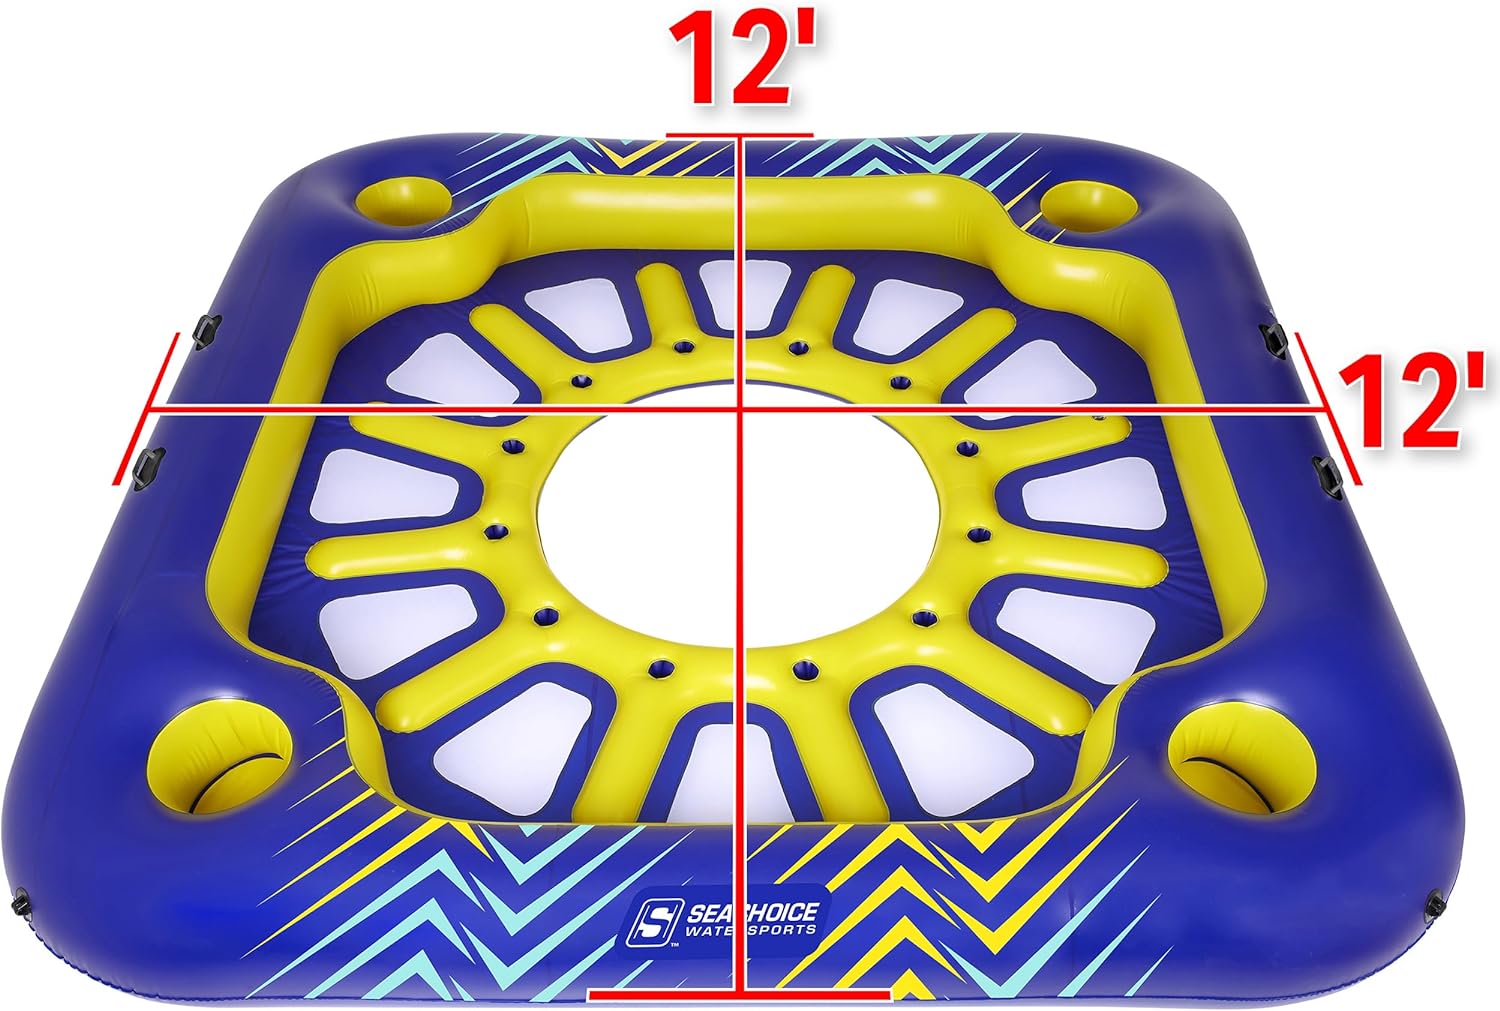 Seachoice 12-Person Party Raft – Inflates to 12 X 12 Feet – Seats 12 Adults – Includes Drink Holders  Large Center Hole for Cooling Off - Seachoice 12-Person Party Raft Review